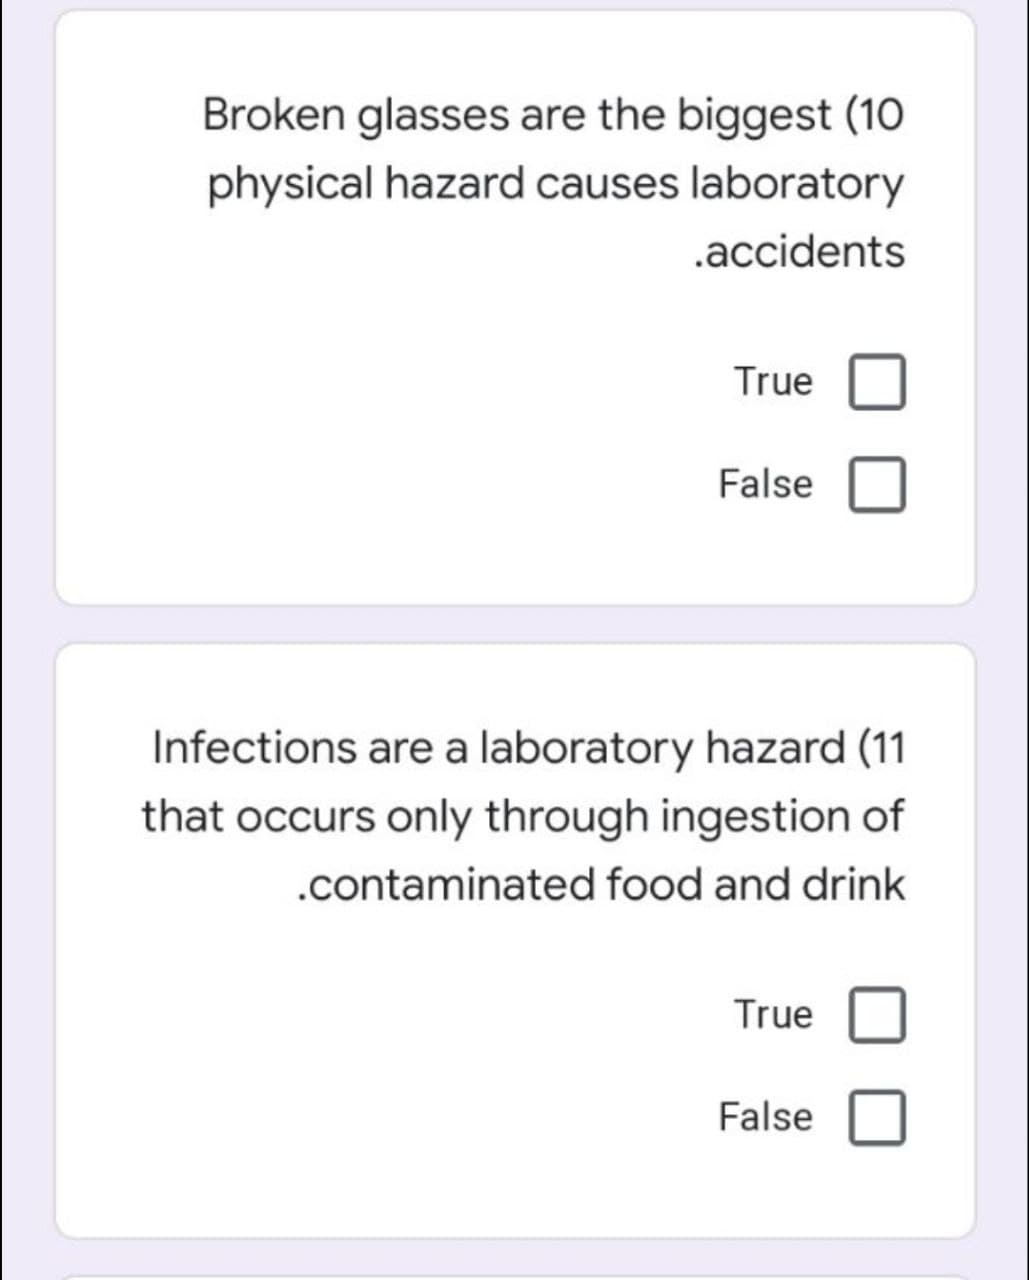 Broken glasses are the biggest (10
physical hazard causes laboratory
.accidents
True
False
Infections are a laboratory hazard (11
that occurs only through ingestion of
.contaminated food and drink
True
False
